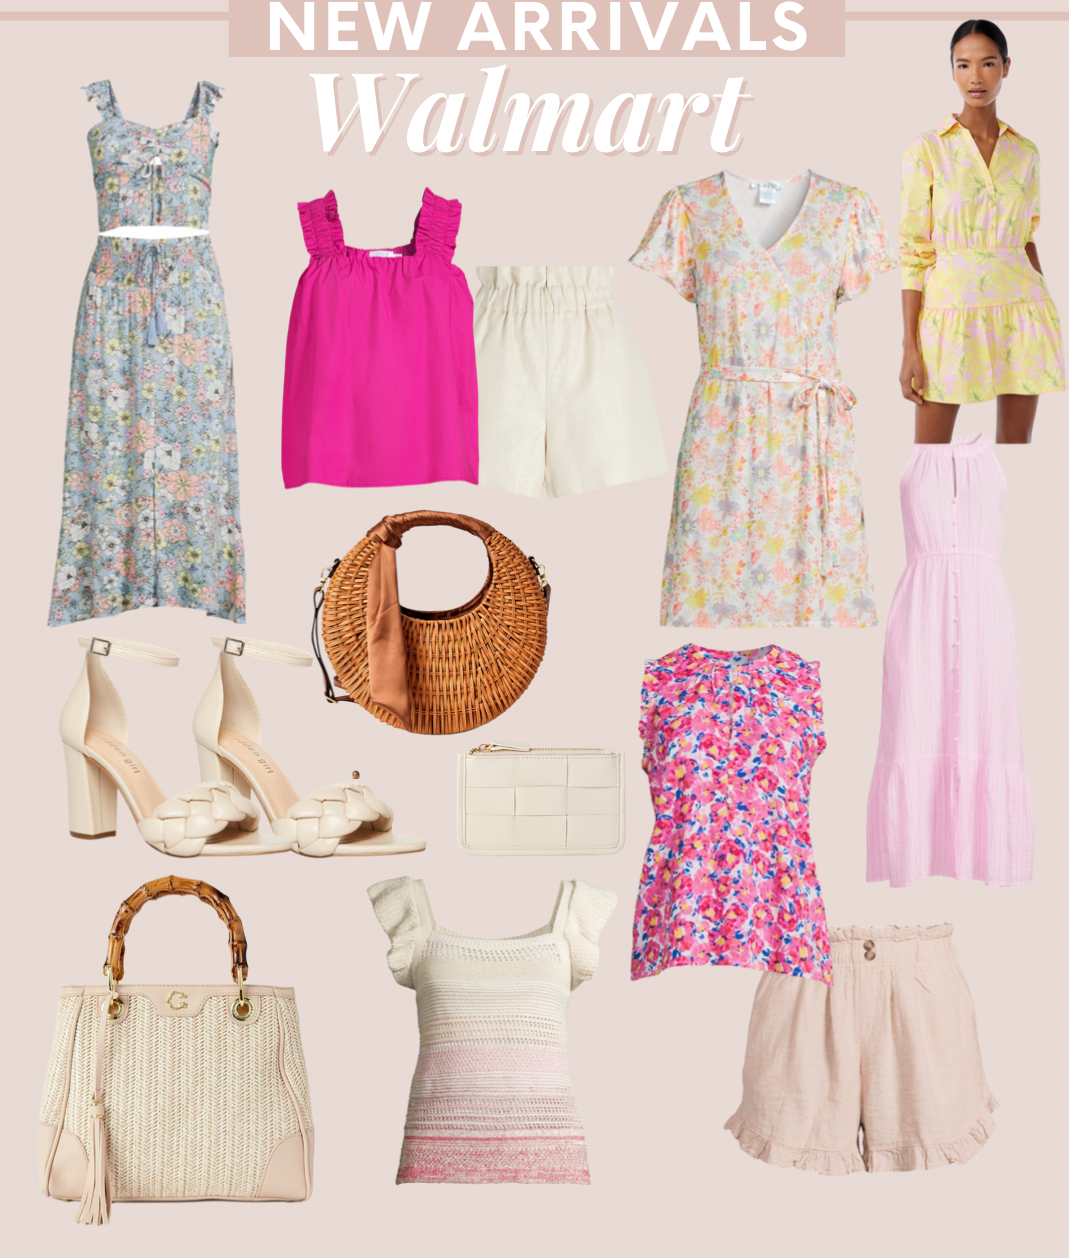 New Arrivals at Walmart for Summer 2022 - Affordable by Amanda 